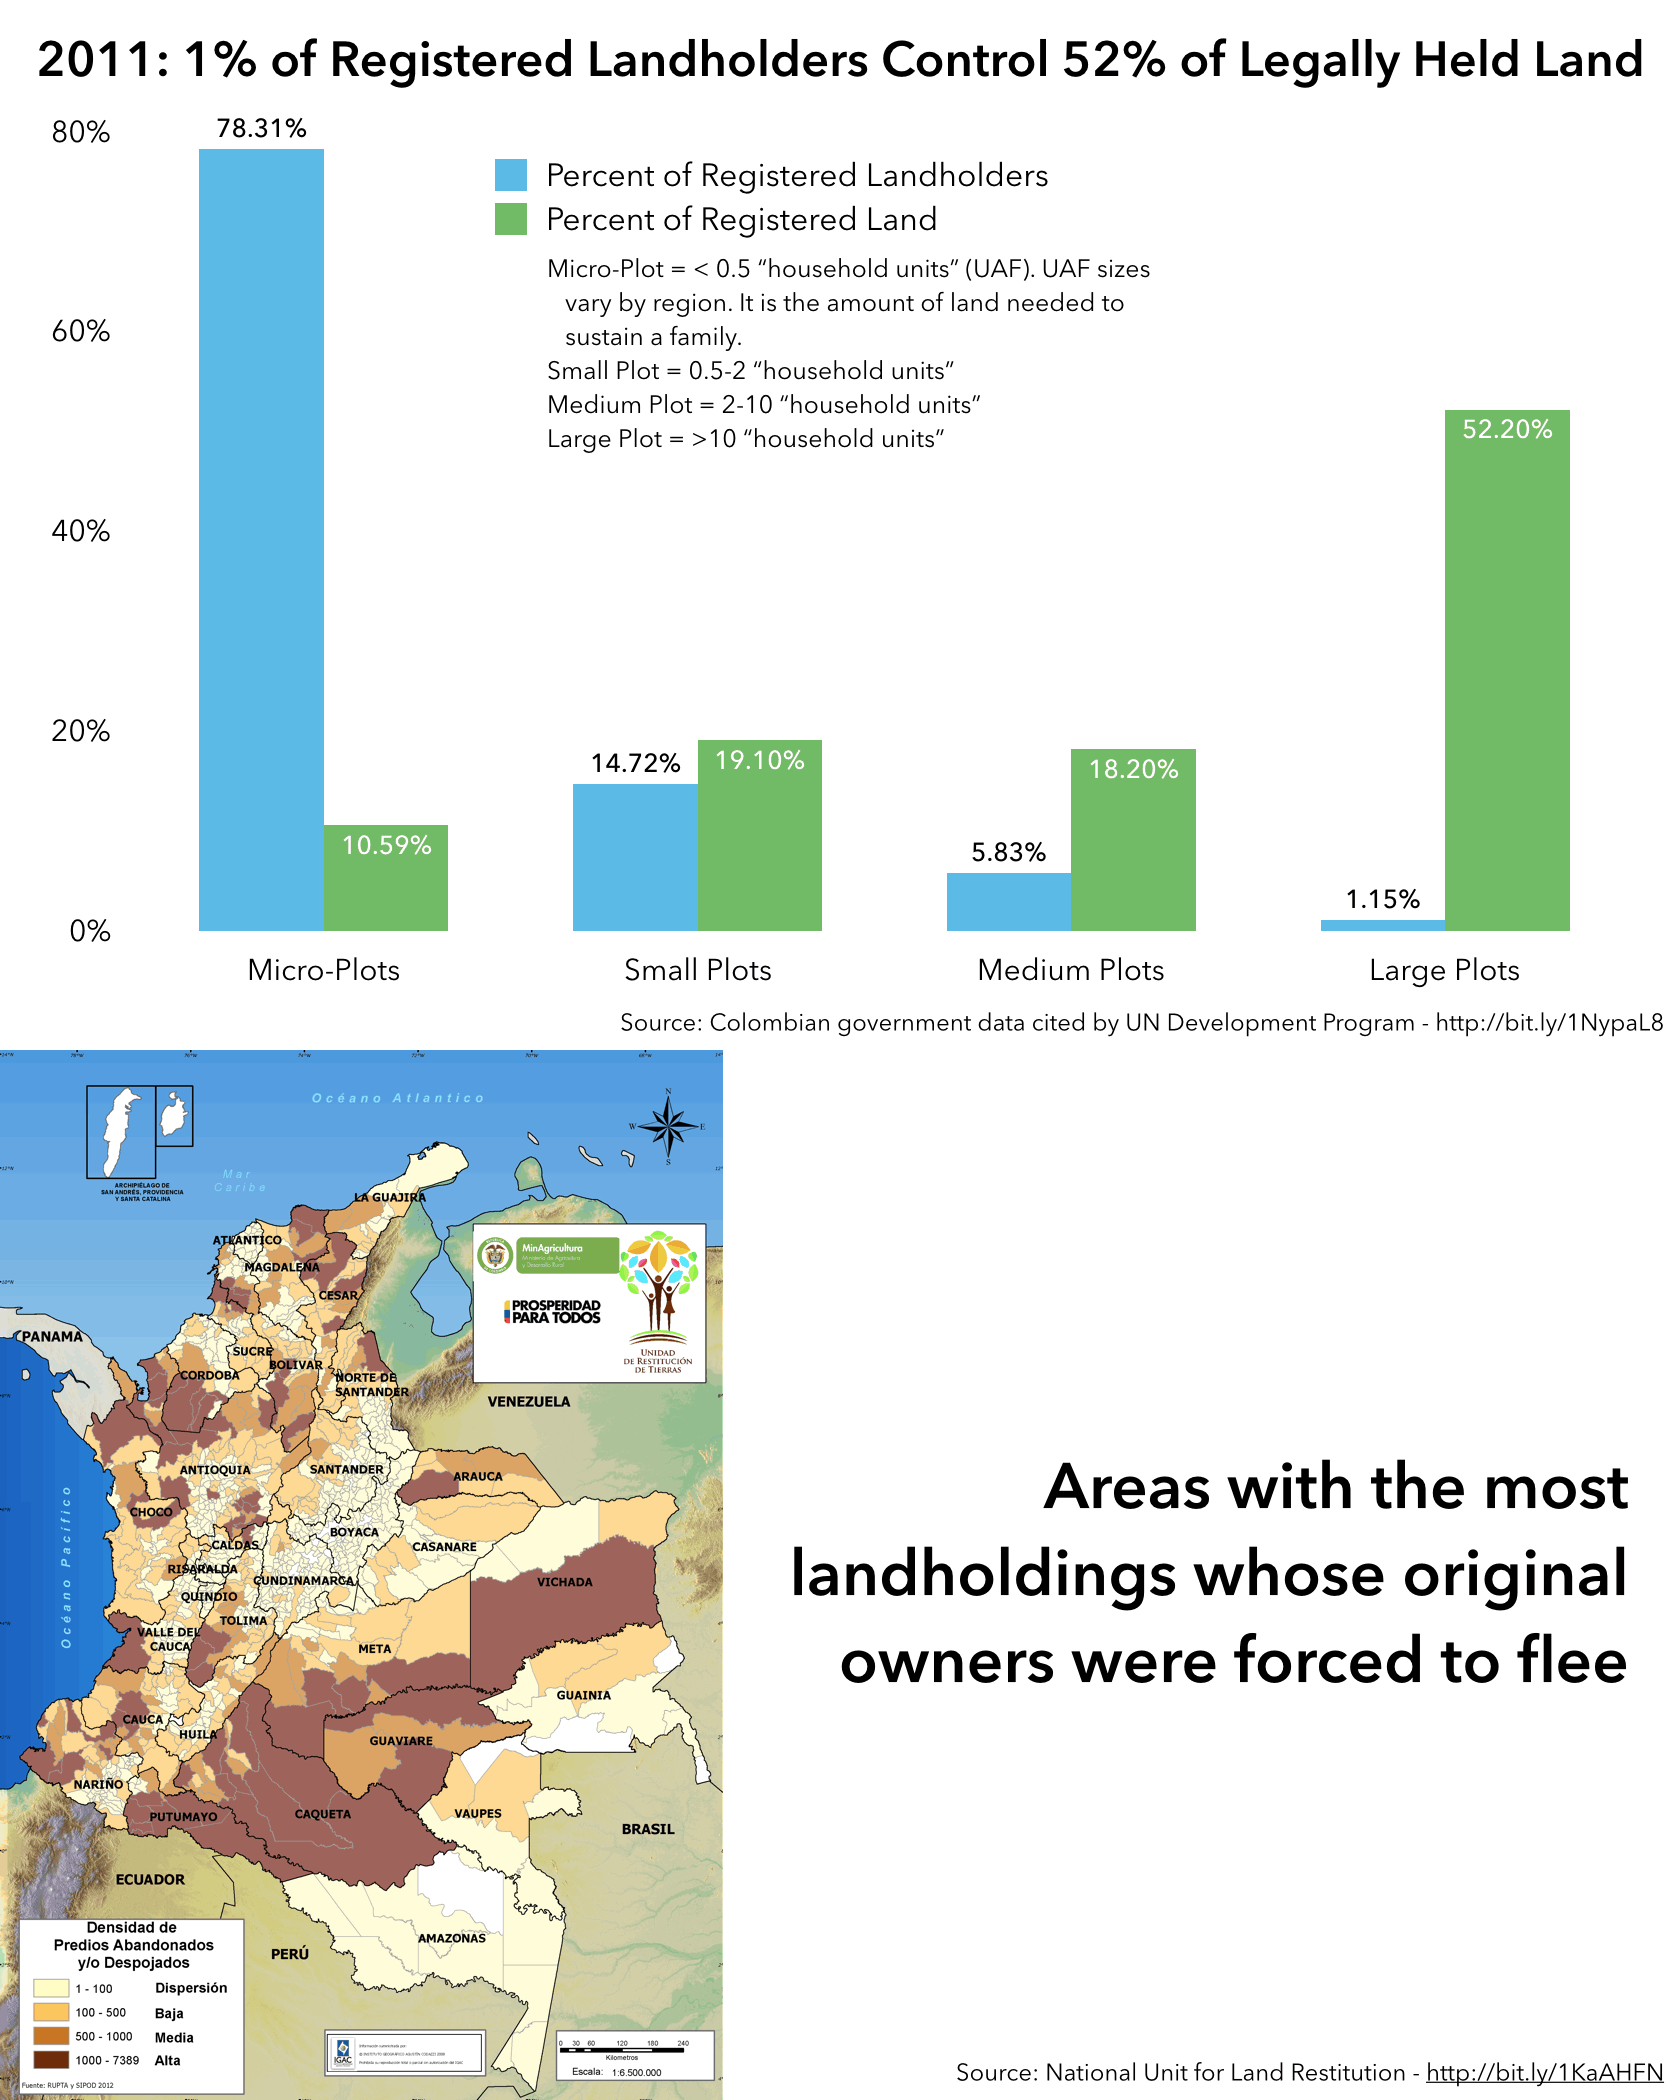 Graphical respresentation of the fact that 1.15 percent of landholders control 52 percent of registered land, and the Land Resitution Unit's map of municipalities with the most dispossession